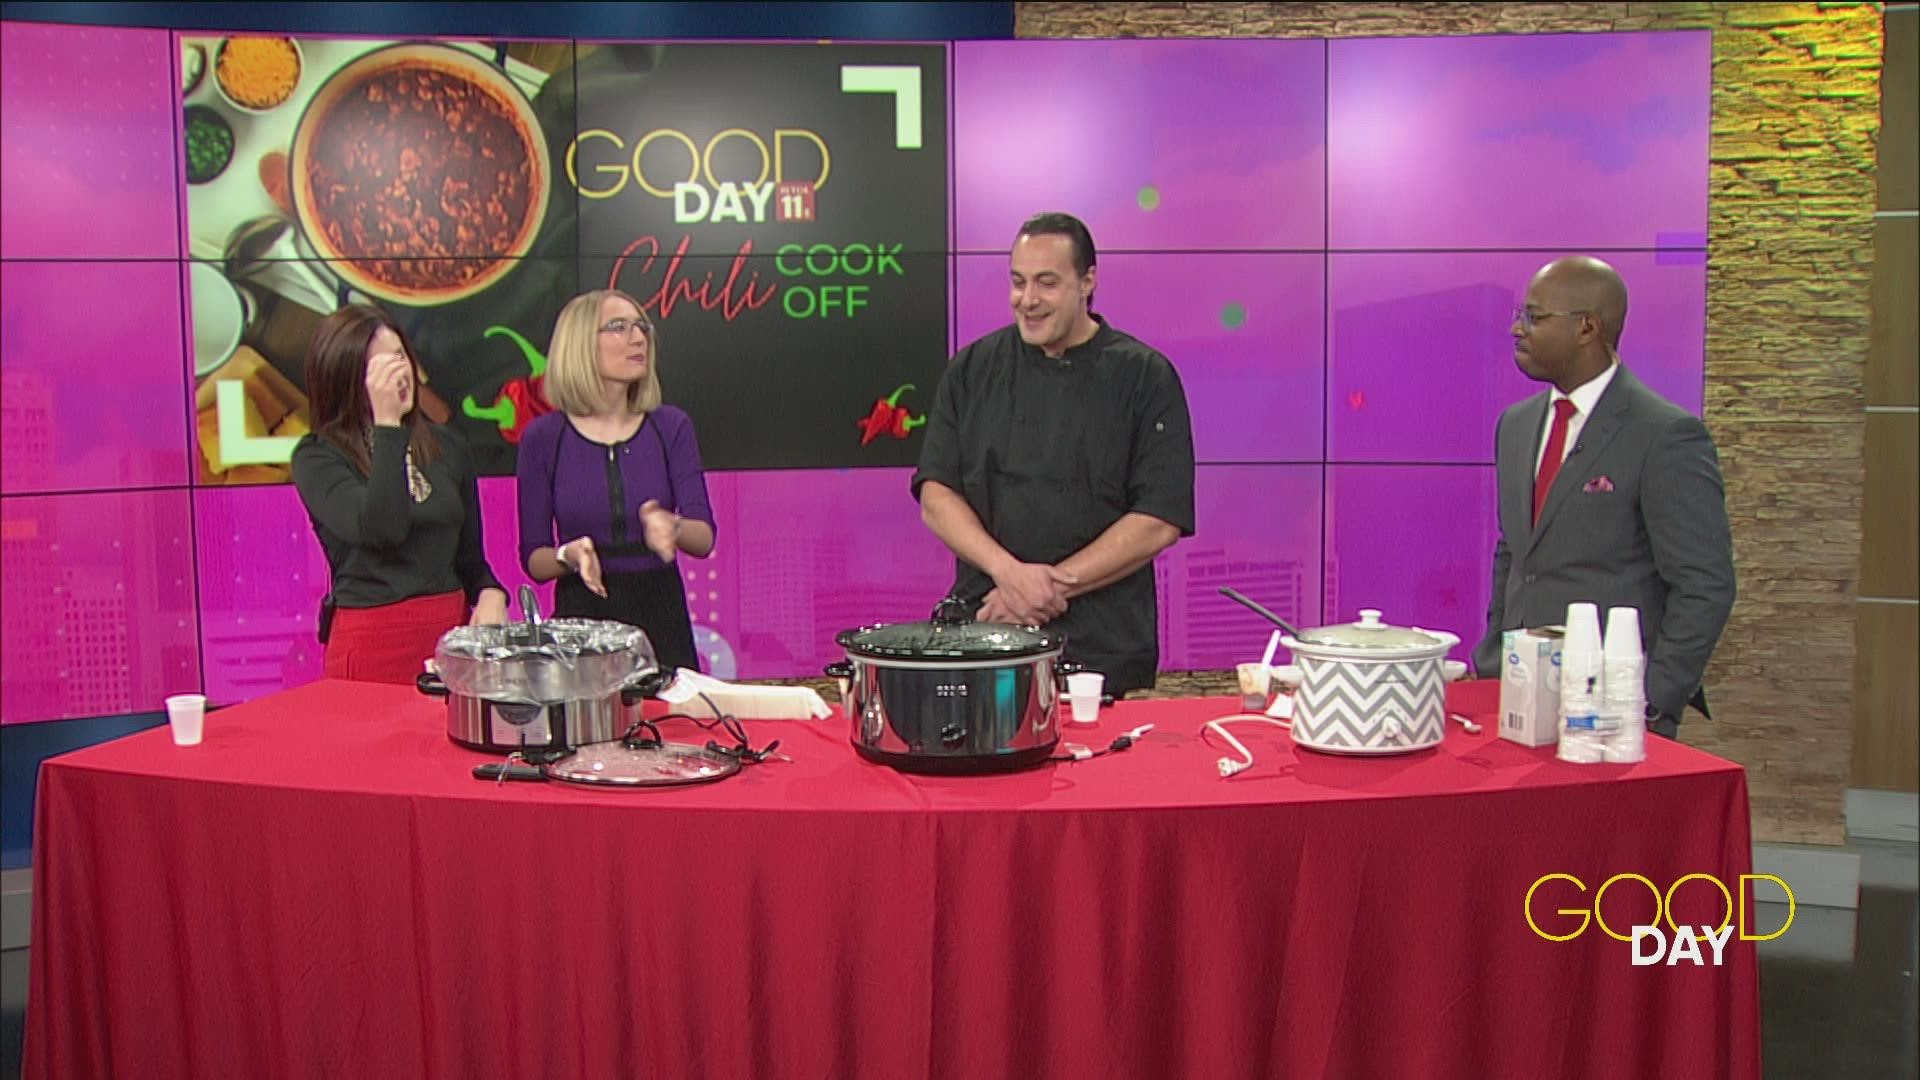 Whose chili will emerge victorious? Tony Packos chef George Chatzidakis chooses a winner.